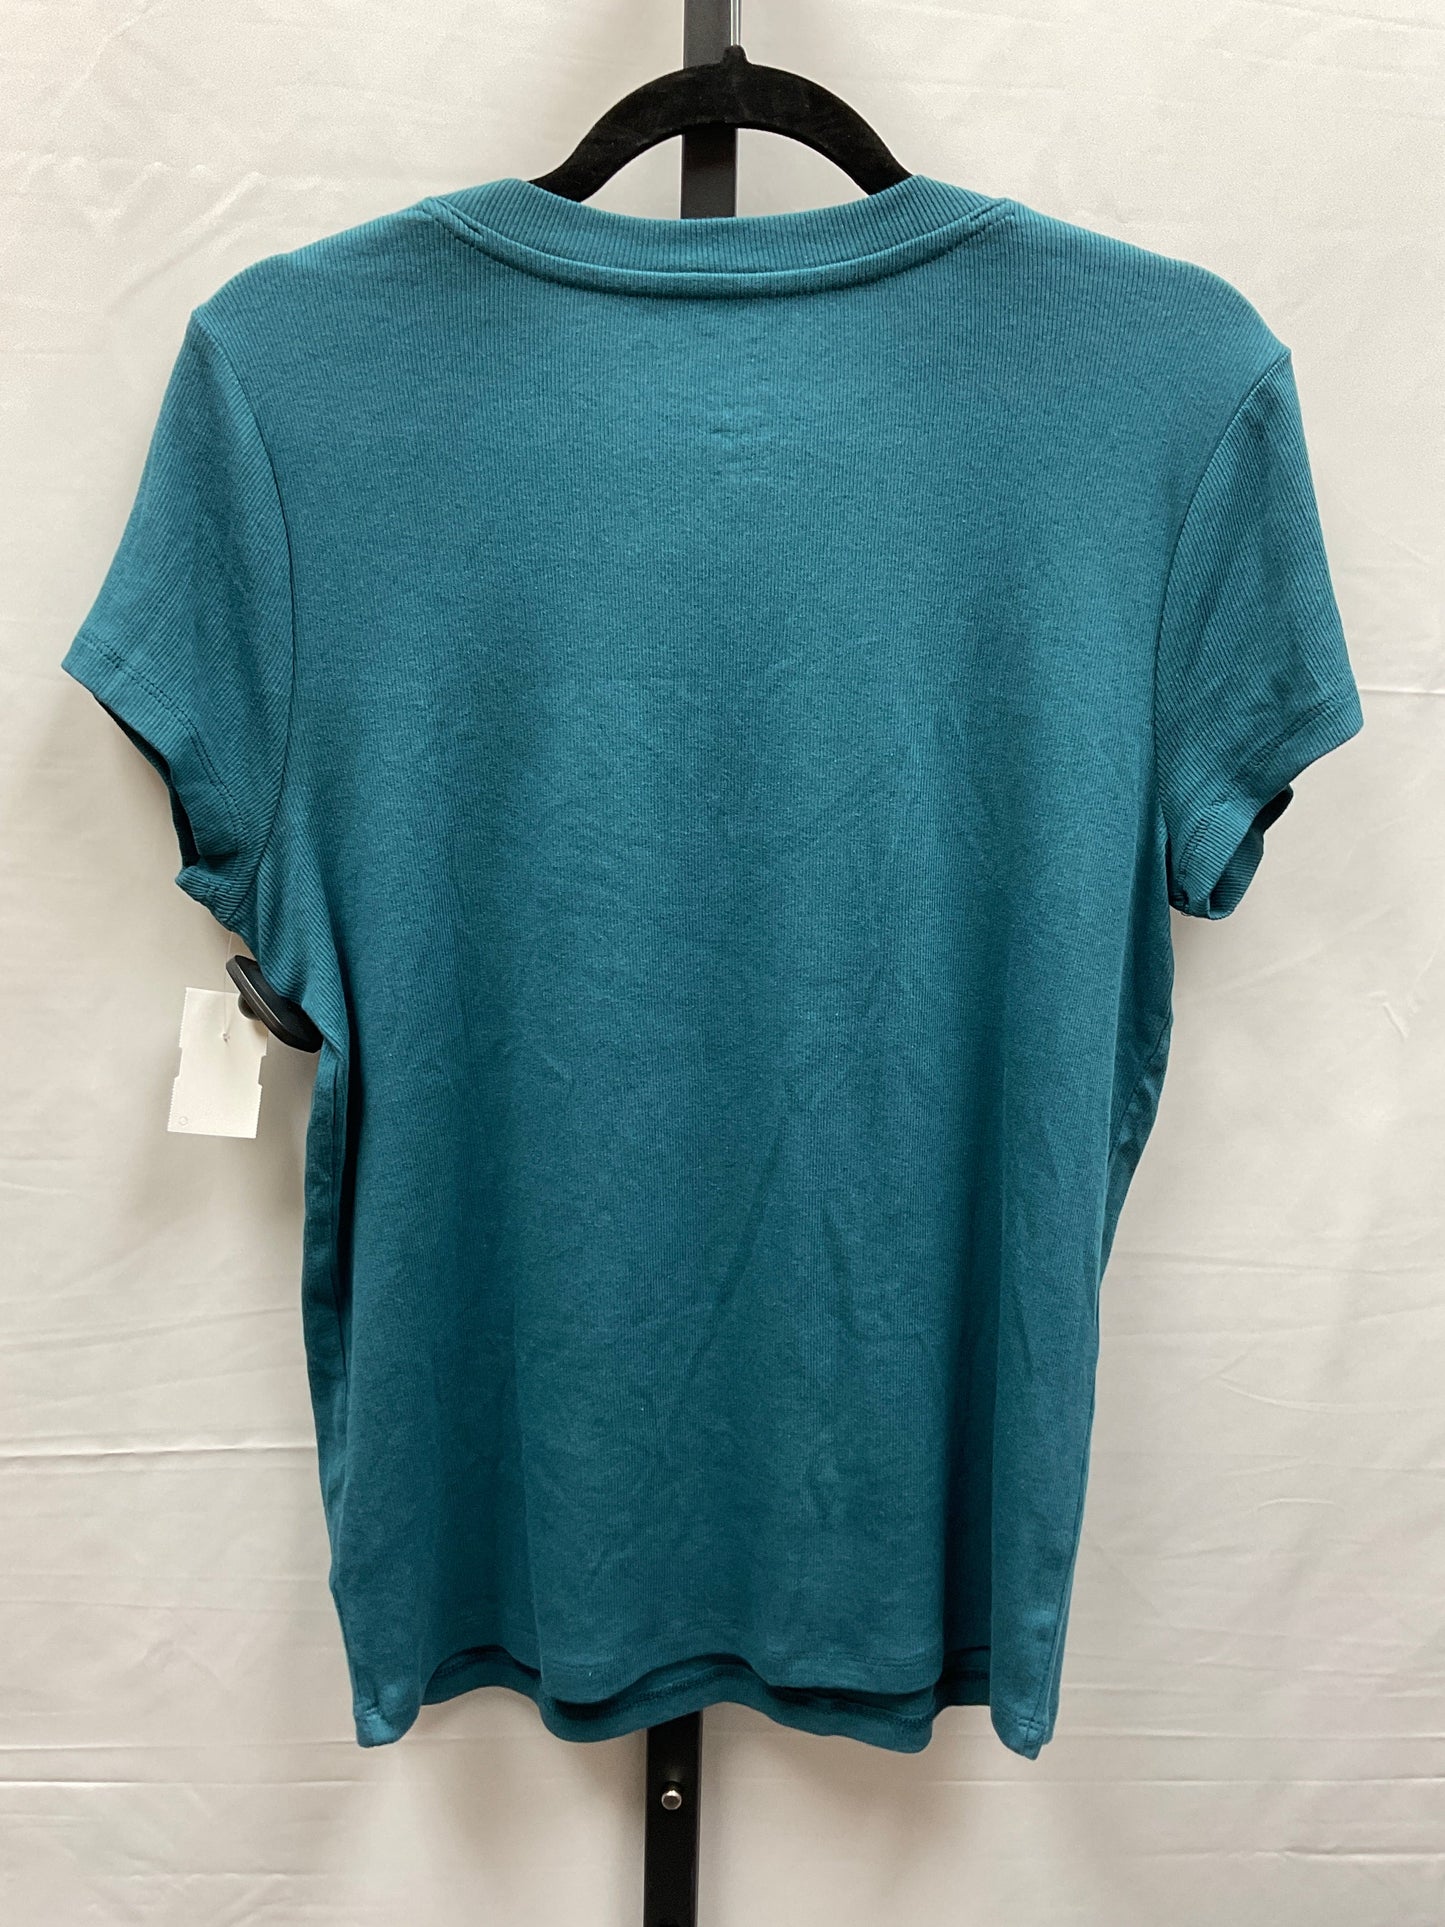 Blue Top Short Sleeve Basic A New Day, Size Xl